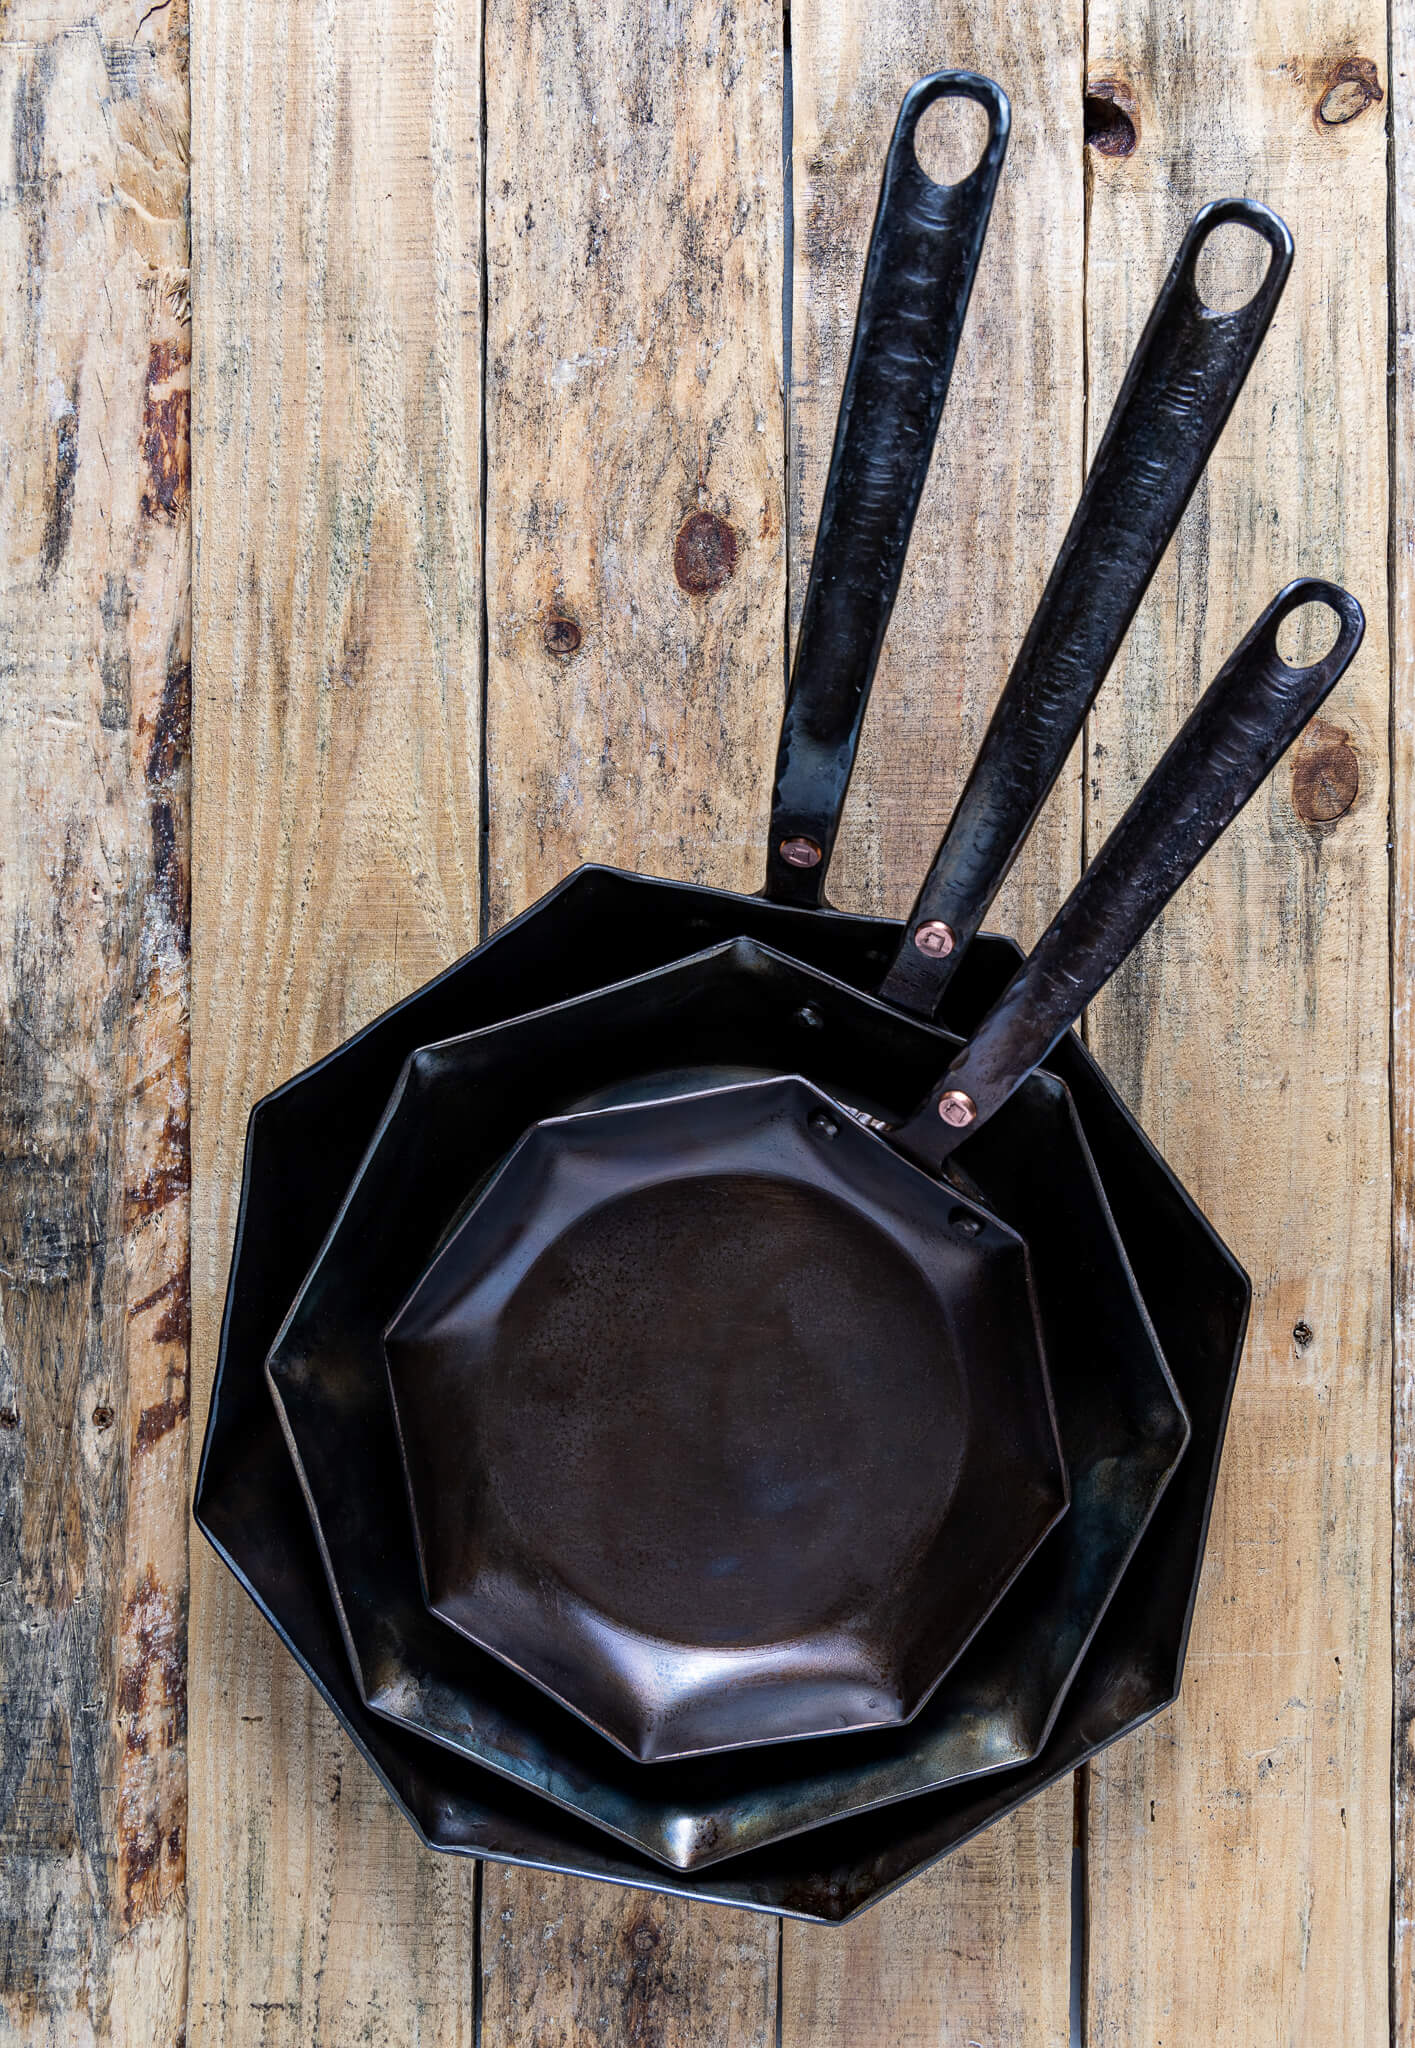 Adventures in Blacksmithing: A Rack for Cast Iron Skillets